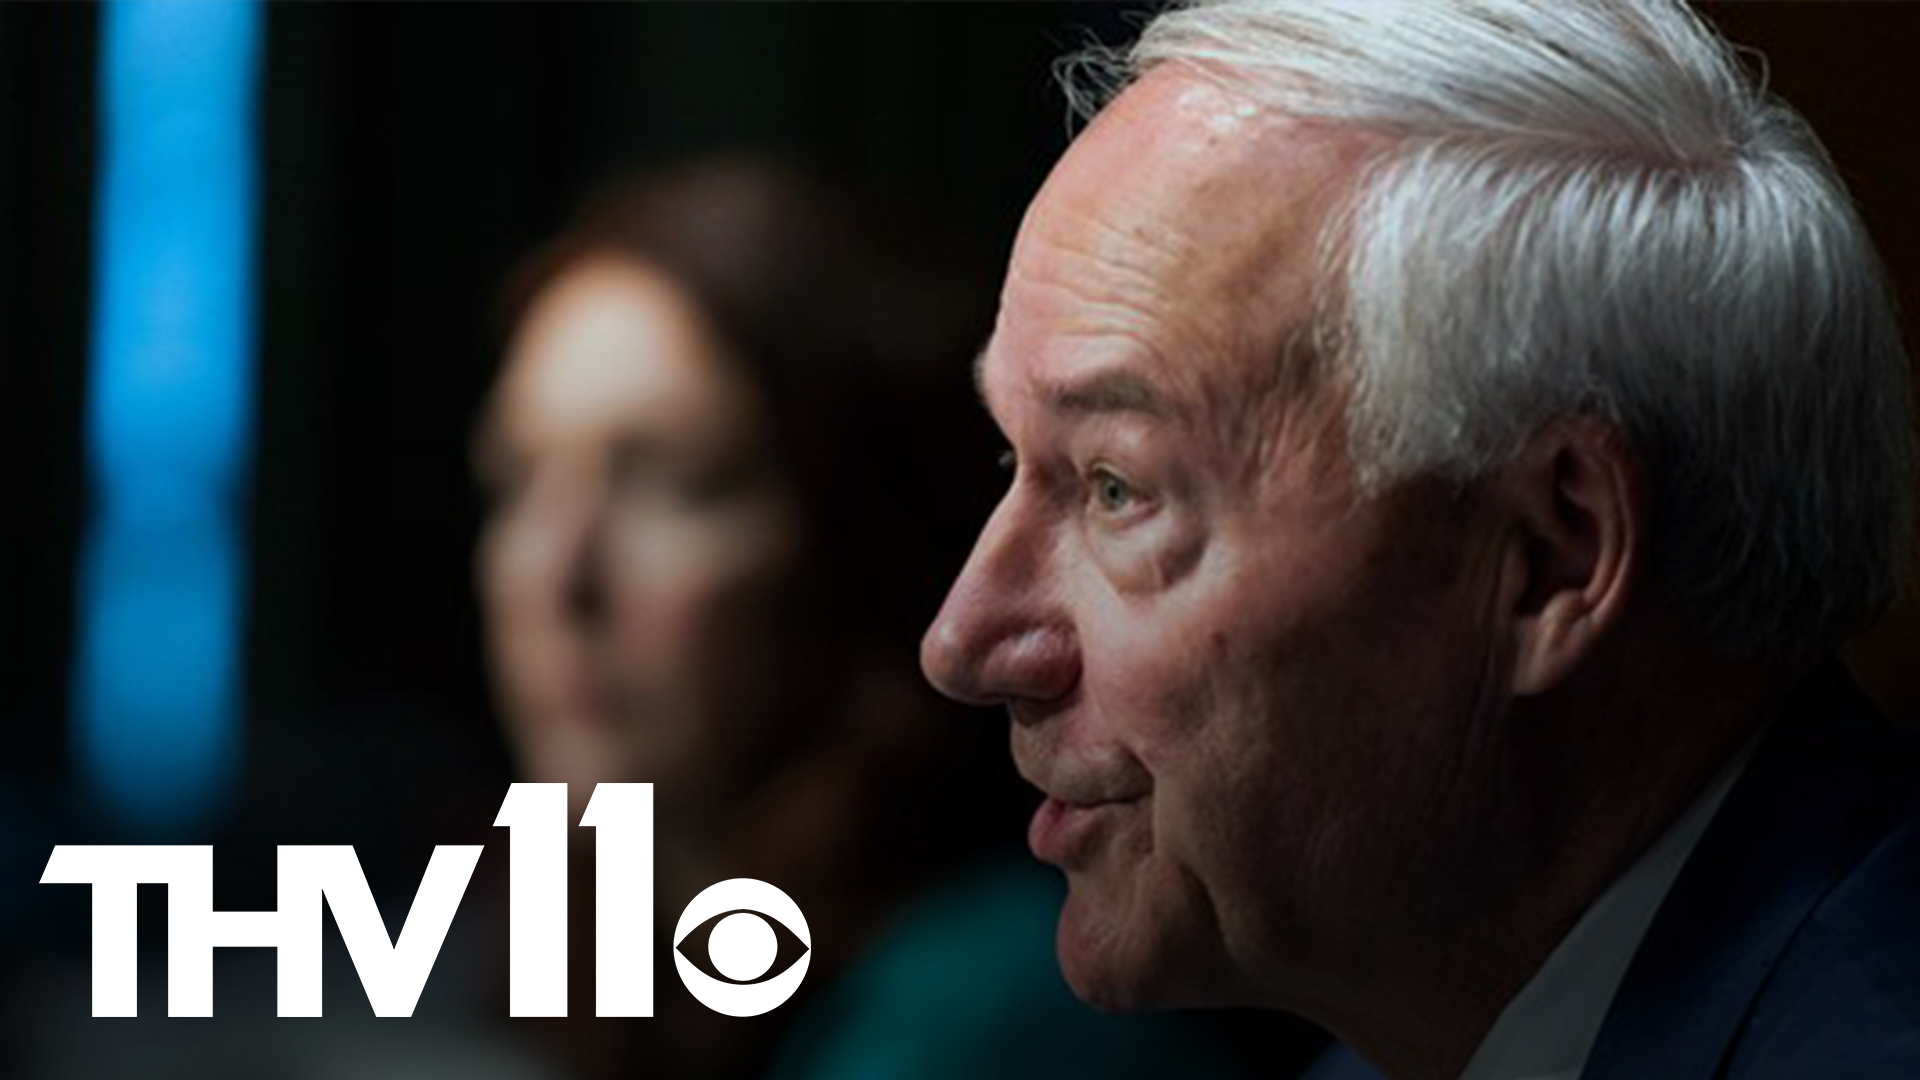 Gov. Asa Hutchinson says he's weighing a presidential run in 2024 and his decision won’t be affected by whether former President Donald Trump decides to run.